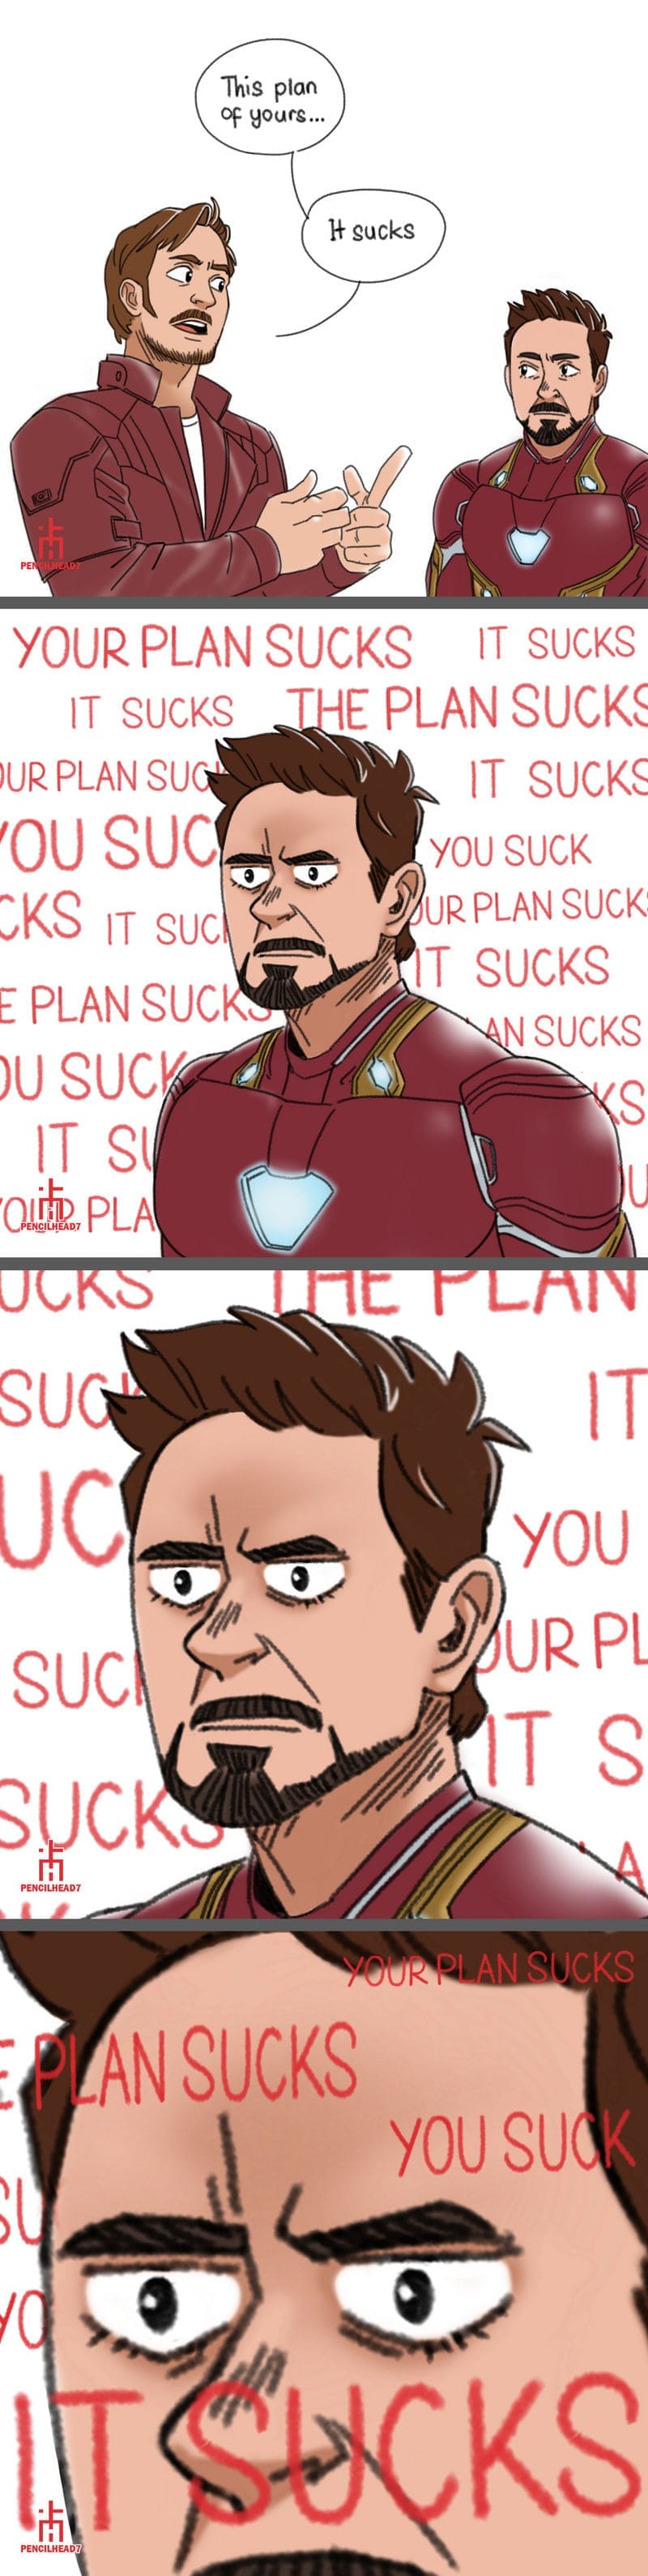 Adorable Mcu Fan Comic That Leaves Us 1 -20 Adorable Mcu Fan Comics That Leaves Us Laughing Harder Than We Could